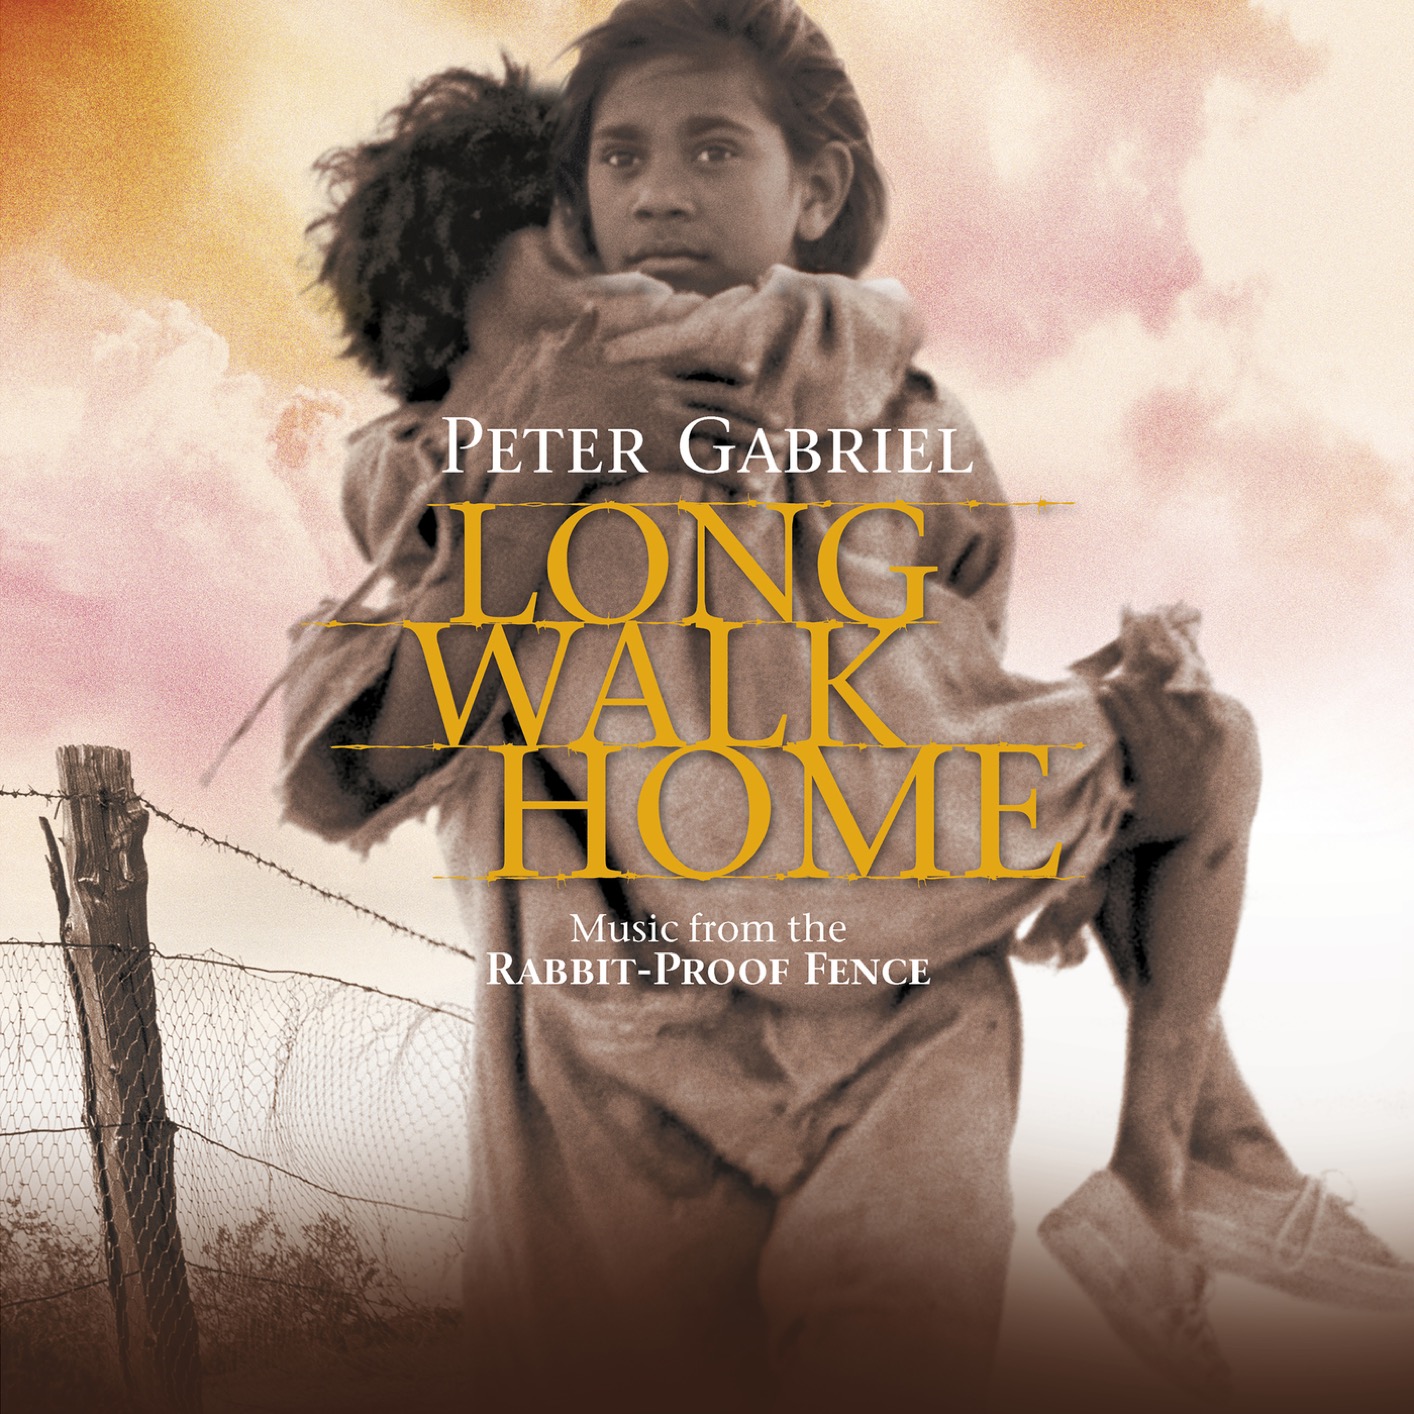 Peter Gabriel – Long Walk Home (Music From The Rabbit-Proof Fence / Remastered) (2002/2019) [FLAC 24bit/44,1kHz]